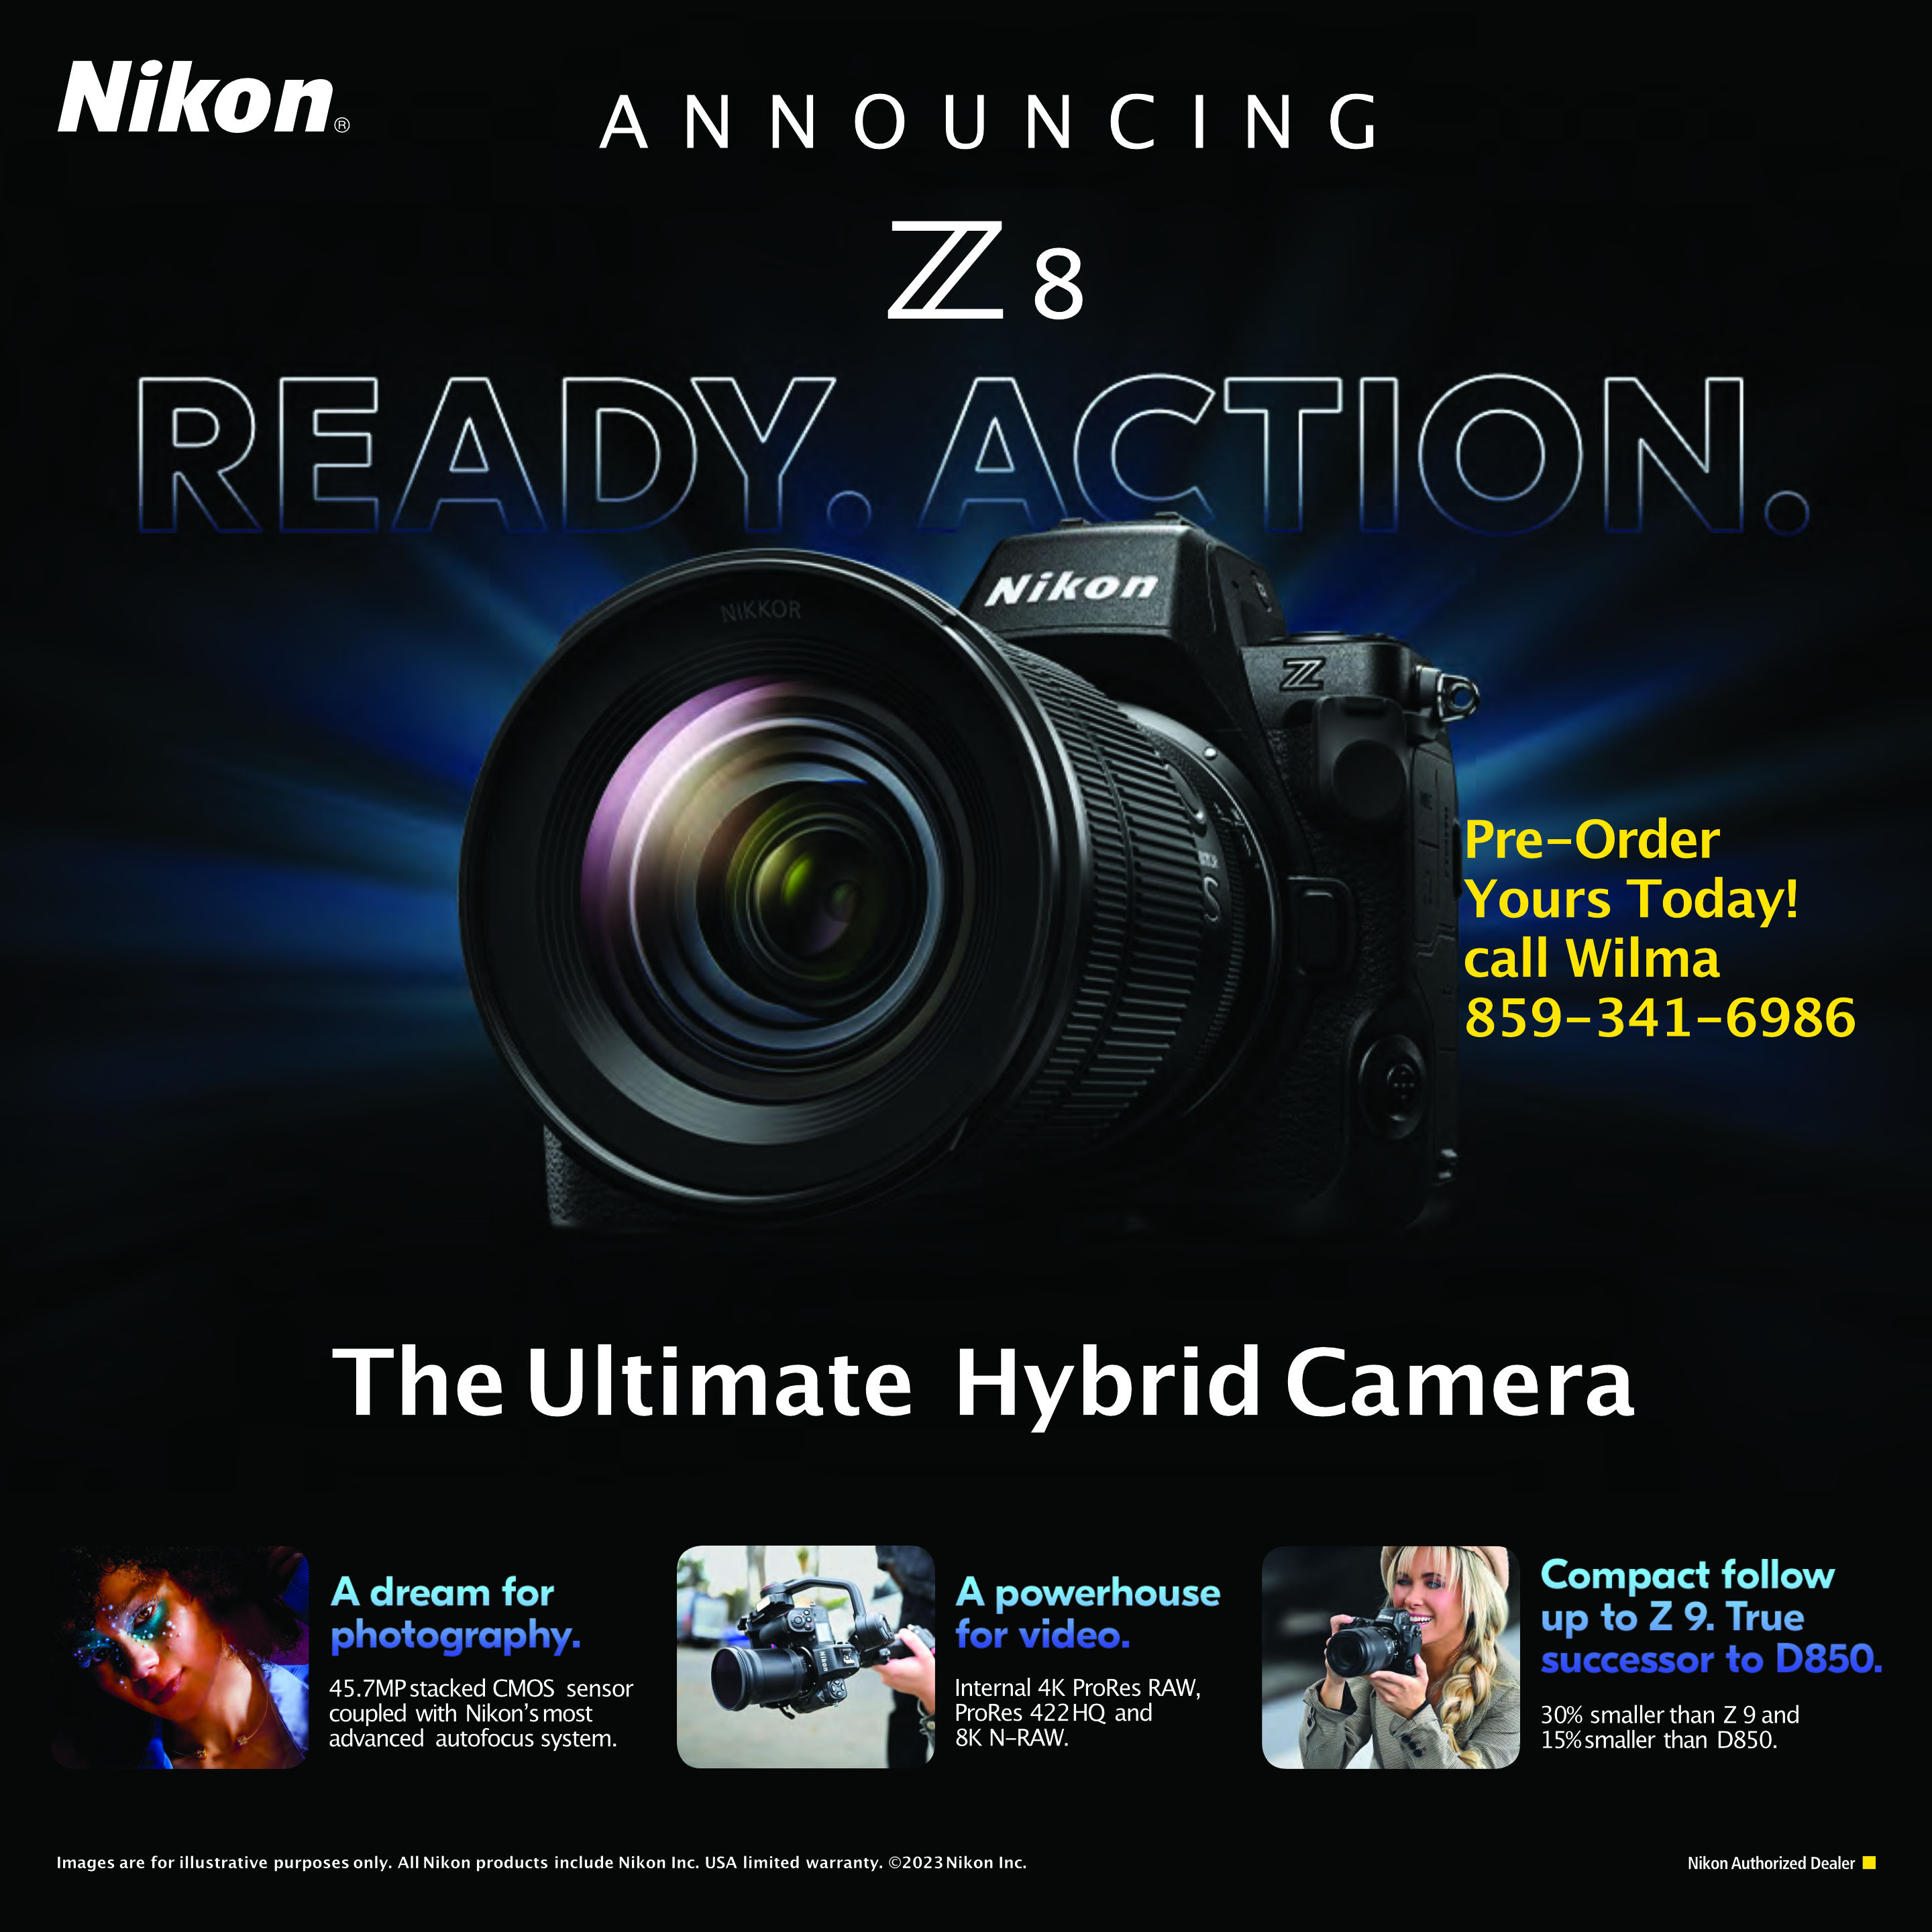 NIKON Z8  The ultimate hybrid camera. Powerful video and still photography capabilities. Video features include 12-bit 8K/60p and 4K/120p RAW plus 10-bit ProRes 422 HQ internal video recording; Photography features include a 45.7MP stacked CMOS sensor, a silent, vibration-free electronic shutter, 120 fps burst shooting and a blackout-free viewfinder. Fast, accurate AF with subject detection powered by deep learning. Professional build and operation. Smart connectivity. All in a brilliant compact, lightweight modular design.